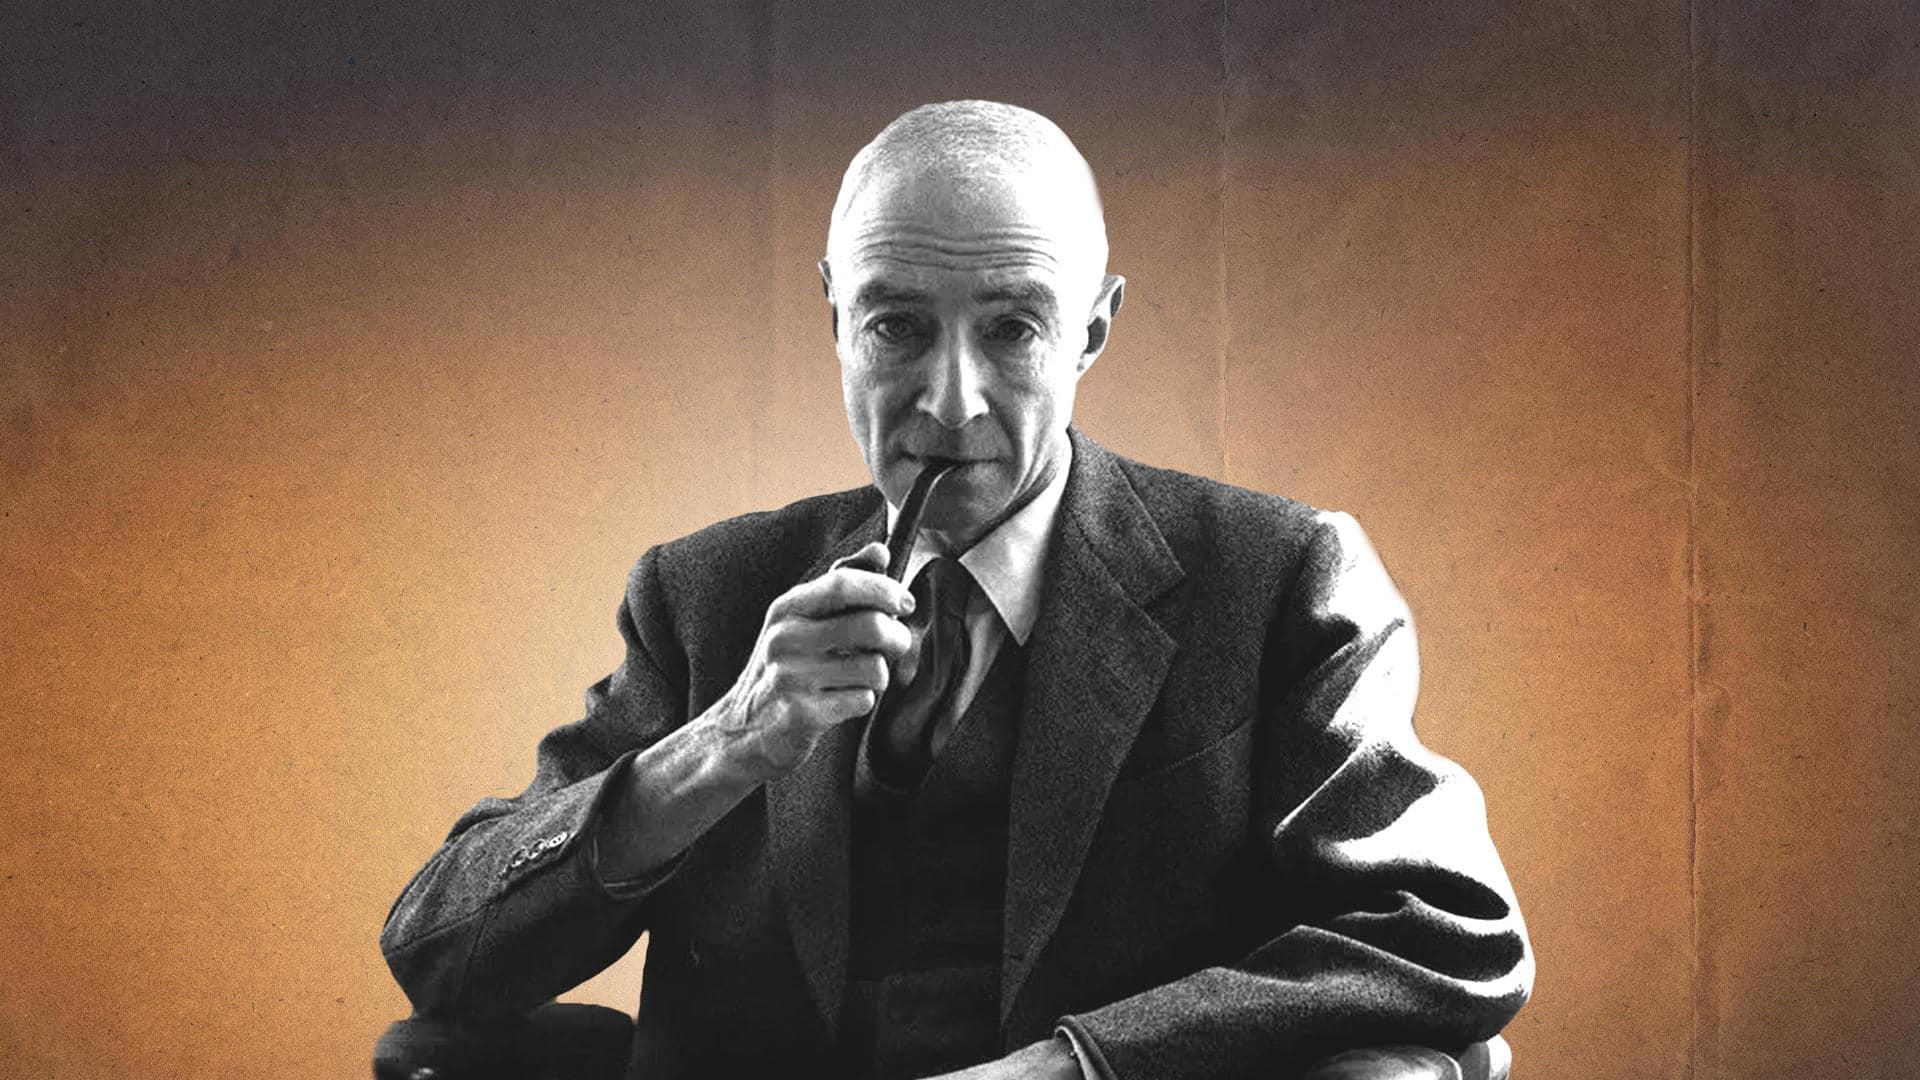 Everything to know about the real Oppenheimer before watching 'Oppenheimer'